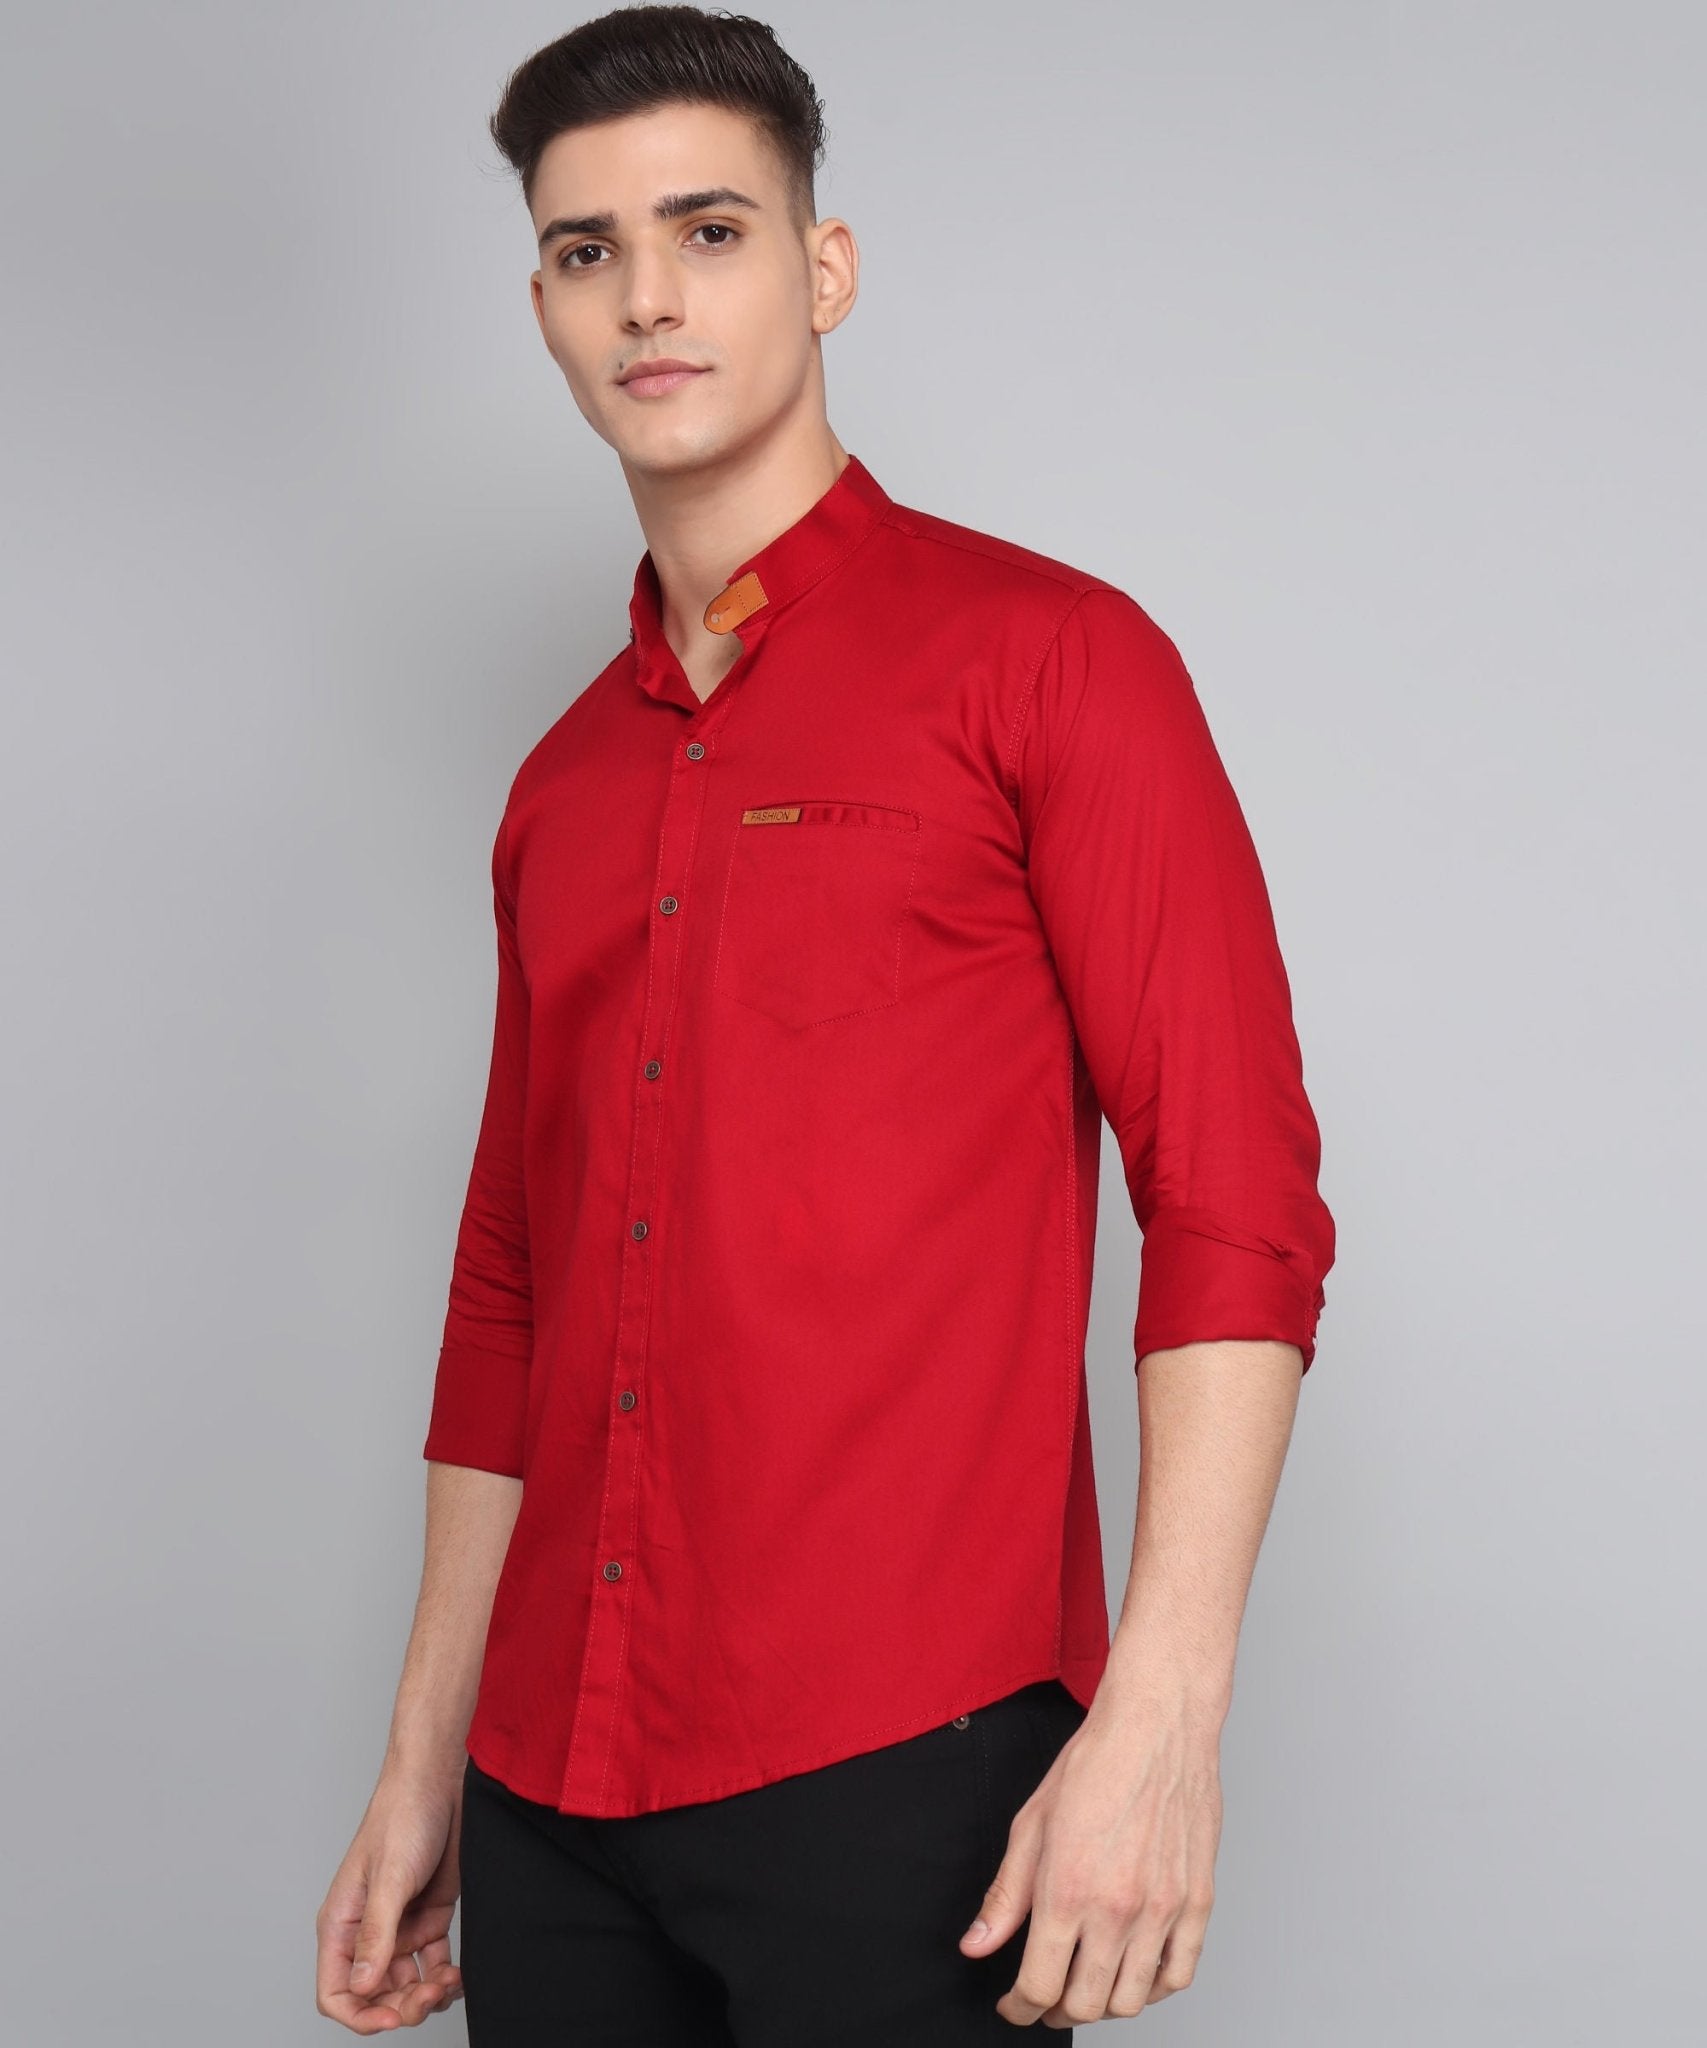 Men's Maroon Casual Cotton Full Sleeve Solid Shirt - TryBuy® USA🇺🇸